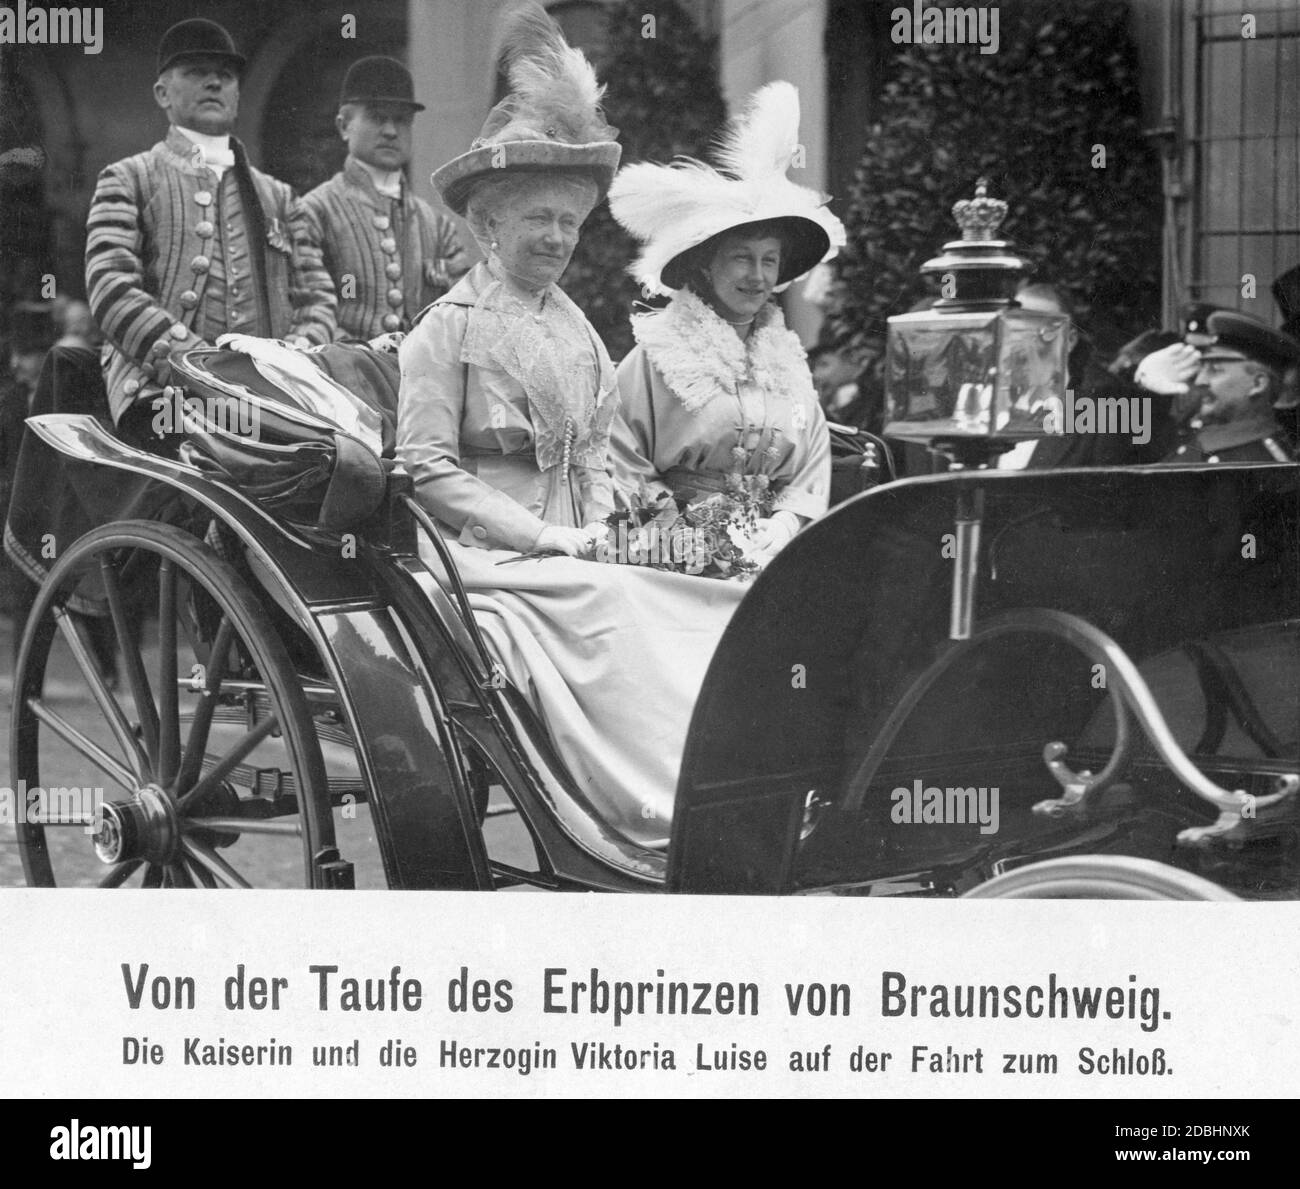 Hereditary Prince Ernst August of Hanover was baptized on May 9, 1914. The photo shows Empress Augusta Victoria (left) together with her daughter Victoria Louise Duchess of Brunswick-Lueneburg (born of Prussia, mother of Ernst August) on a carriage ride to the castle in Brunswick. Stock Photo